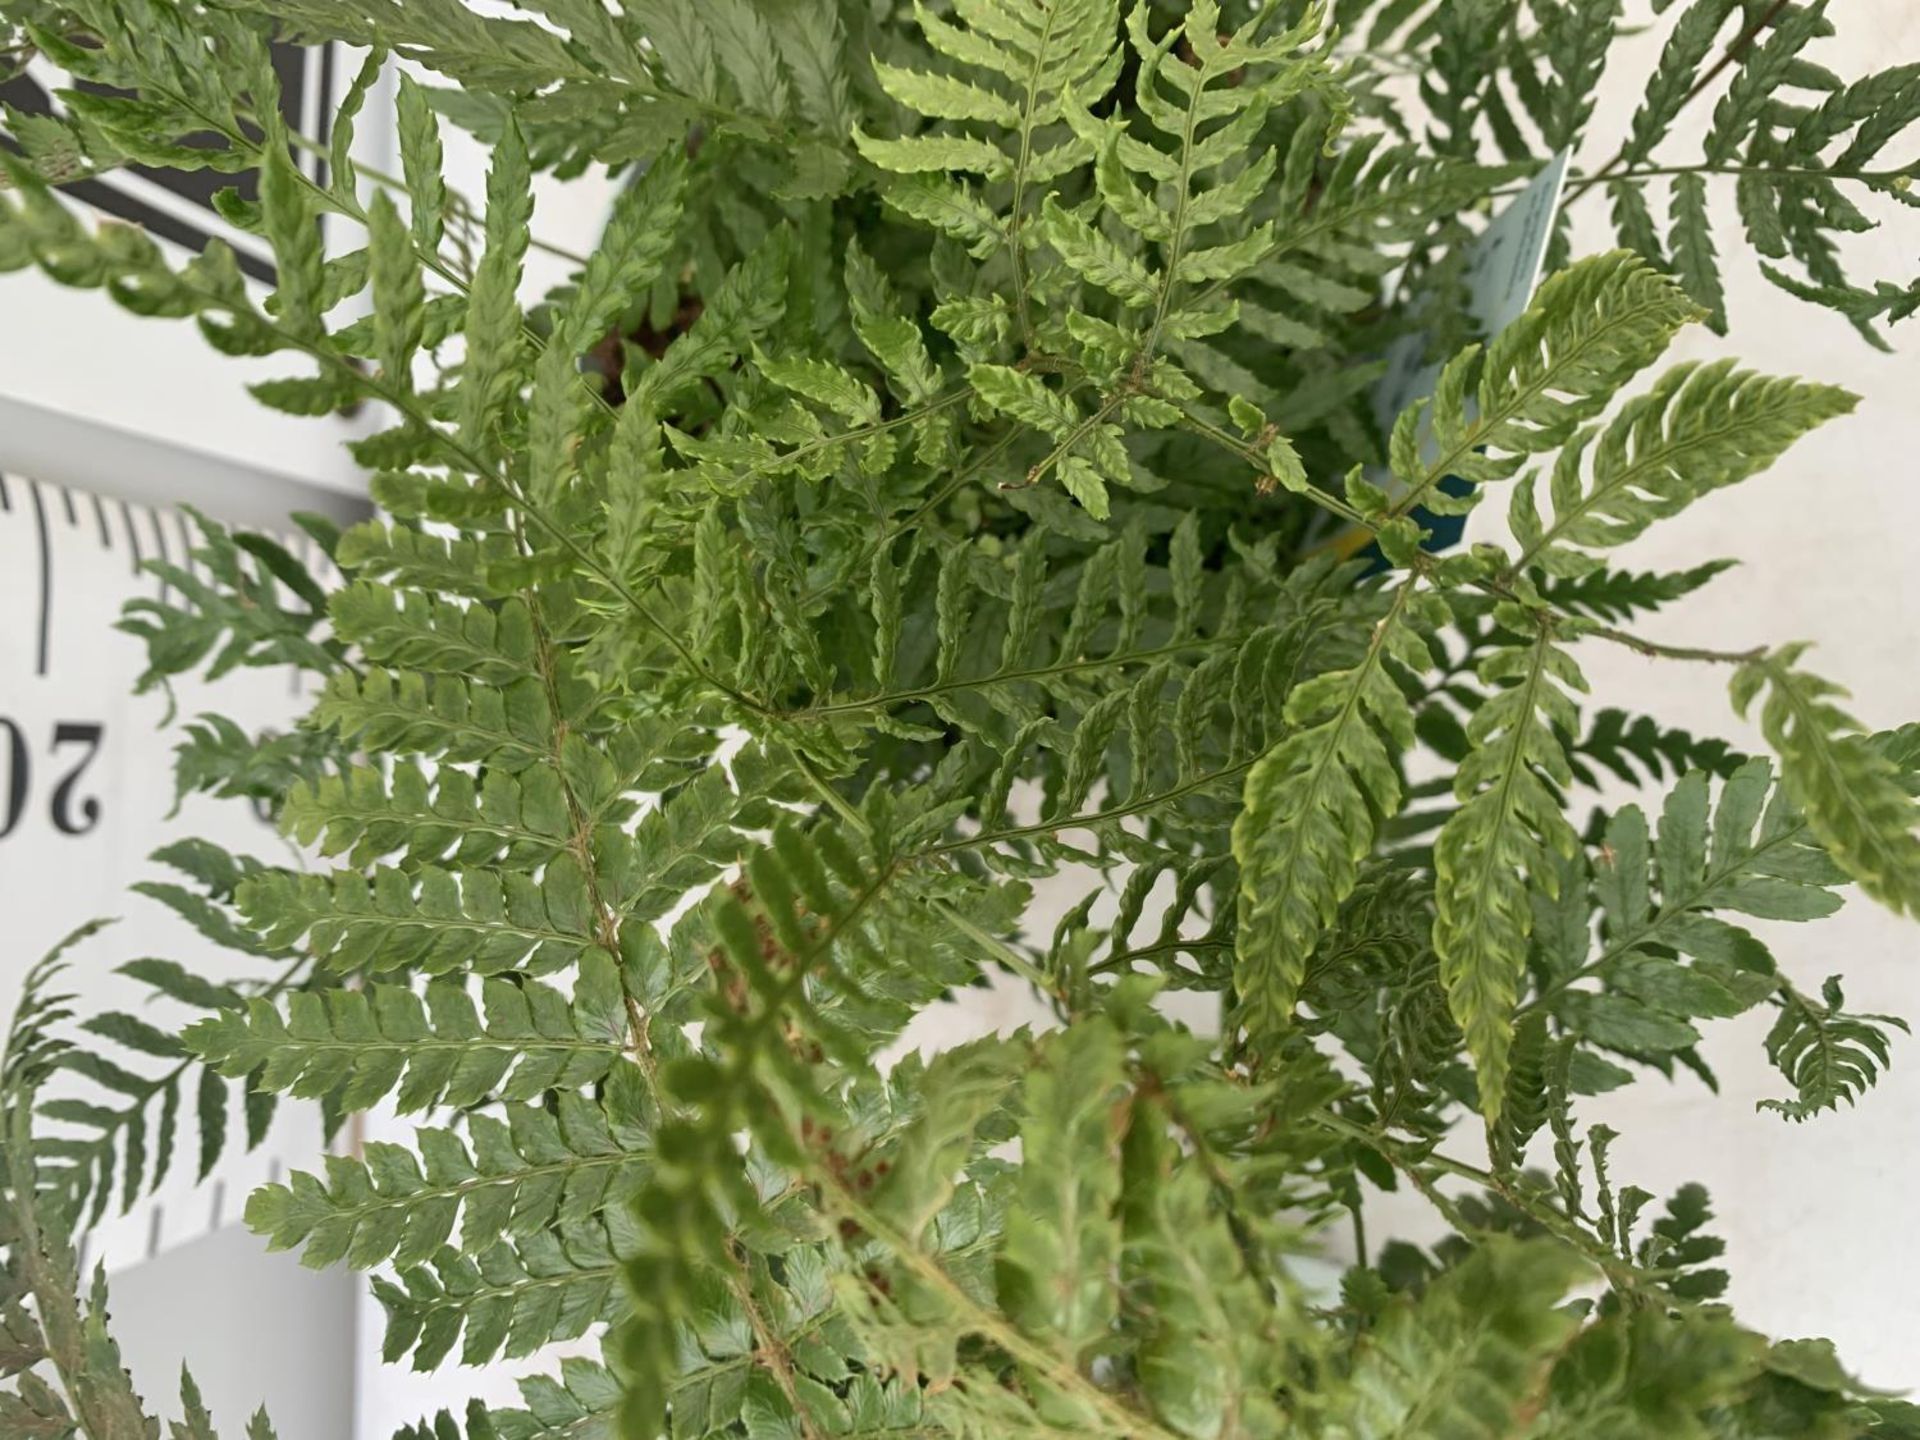 TWO FERNS 'DRYOPTERIS ERYTHROSORA' AND 'POLYSTICHUM POLYBLEPHARUM JADE' IN 2 LTR POTS APPROX 40CM IN - Image 6 of 8